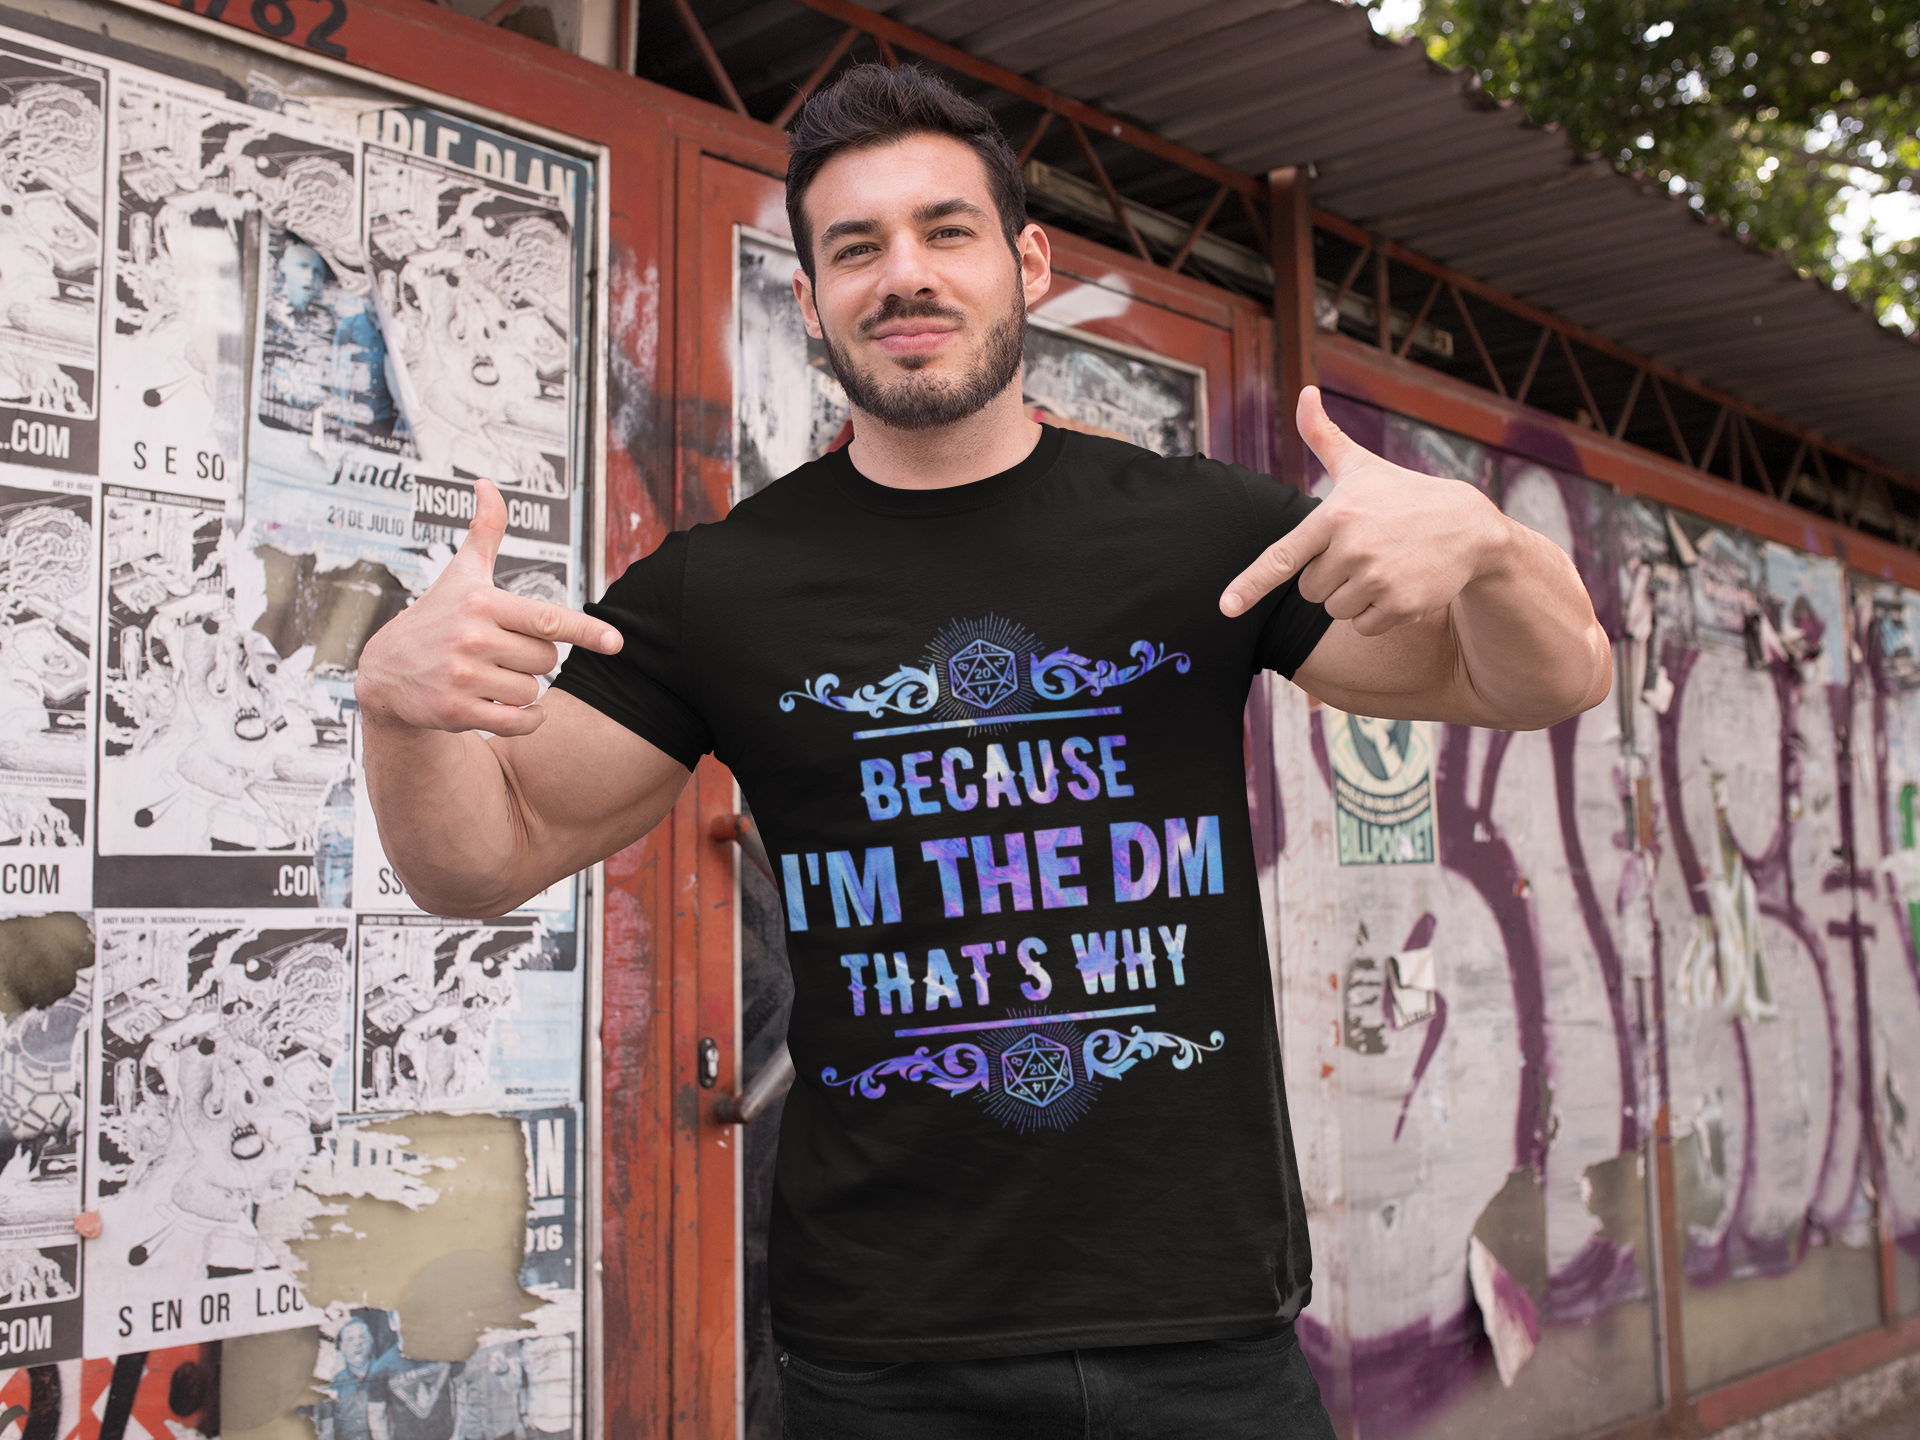 Dungeon And Dragon T Shirt, Because Im The Dm Thats Why DND T Shirt, RPG Dice Games Tshirt